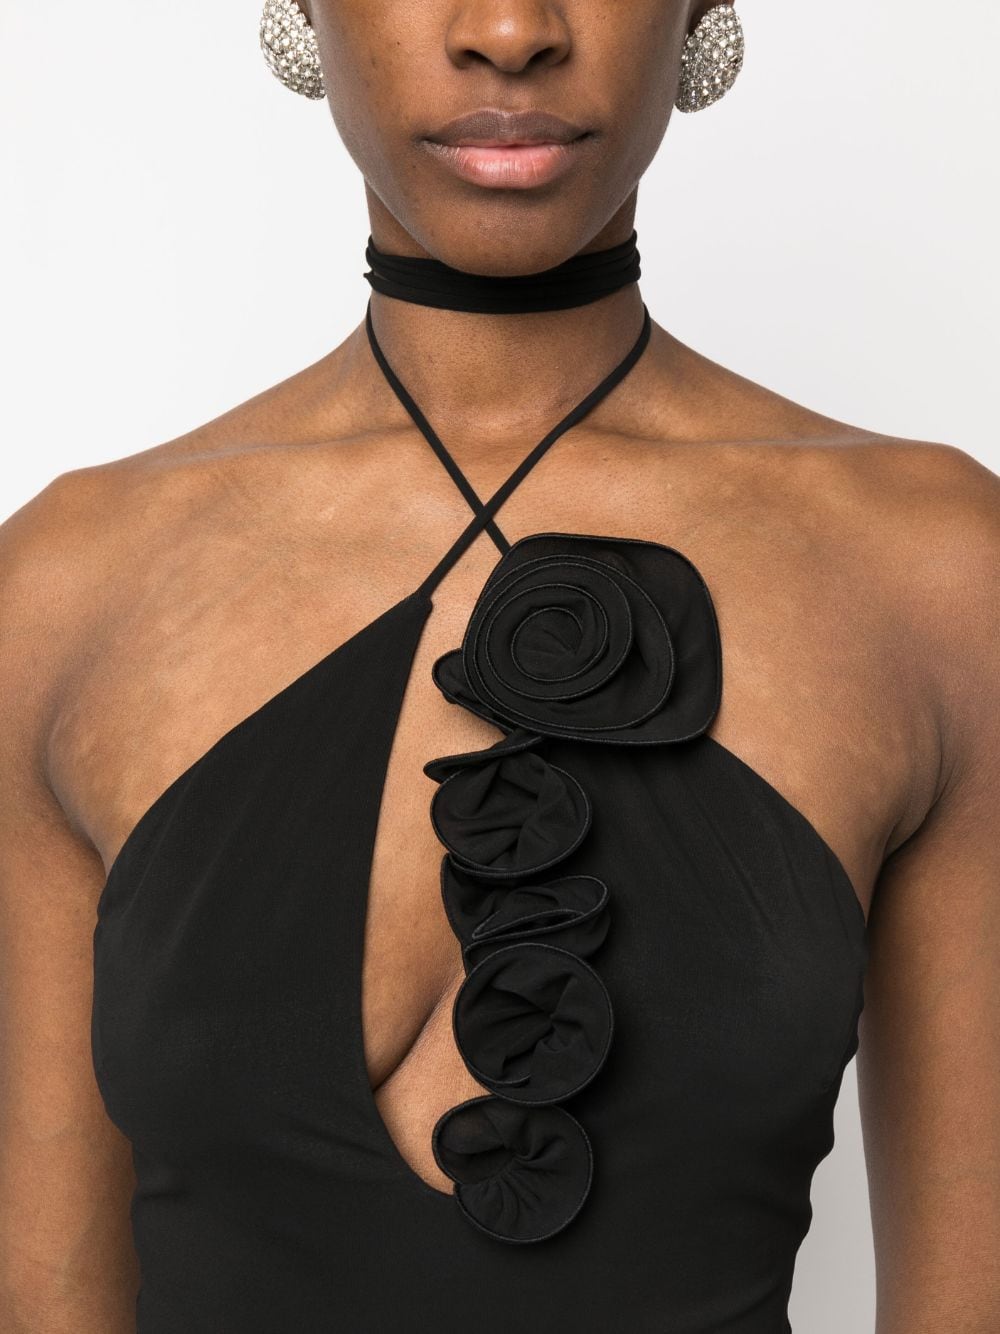 Delicate Floral Lace Halter Top in Black  I AM MORE SCARSDALE - I Am More  Scarsdale